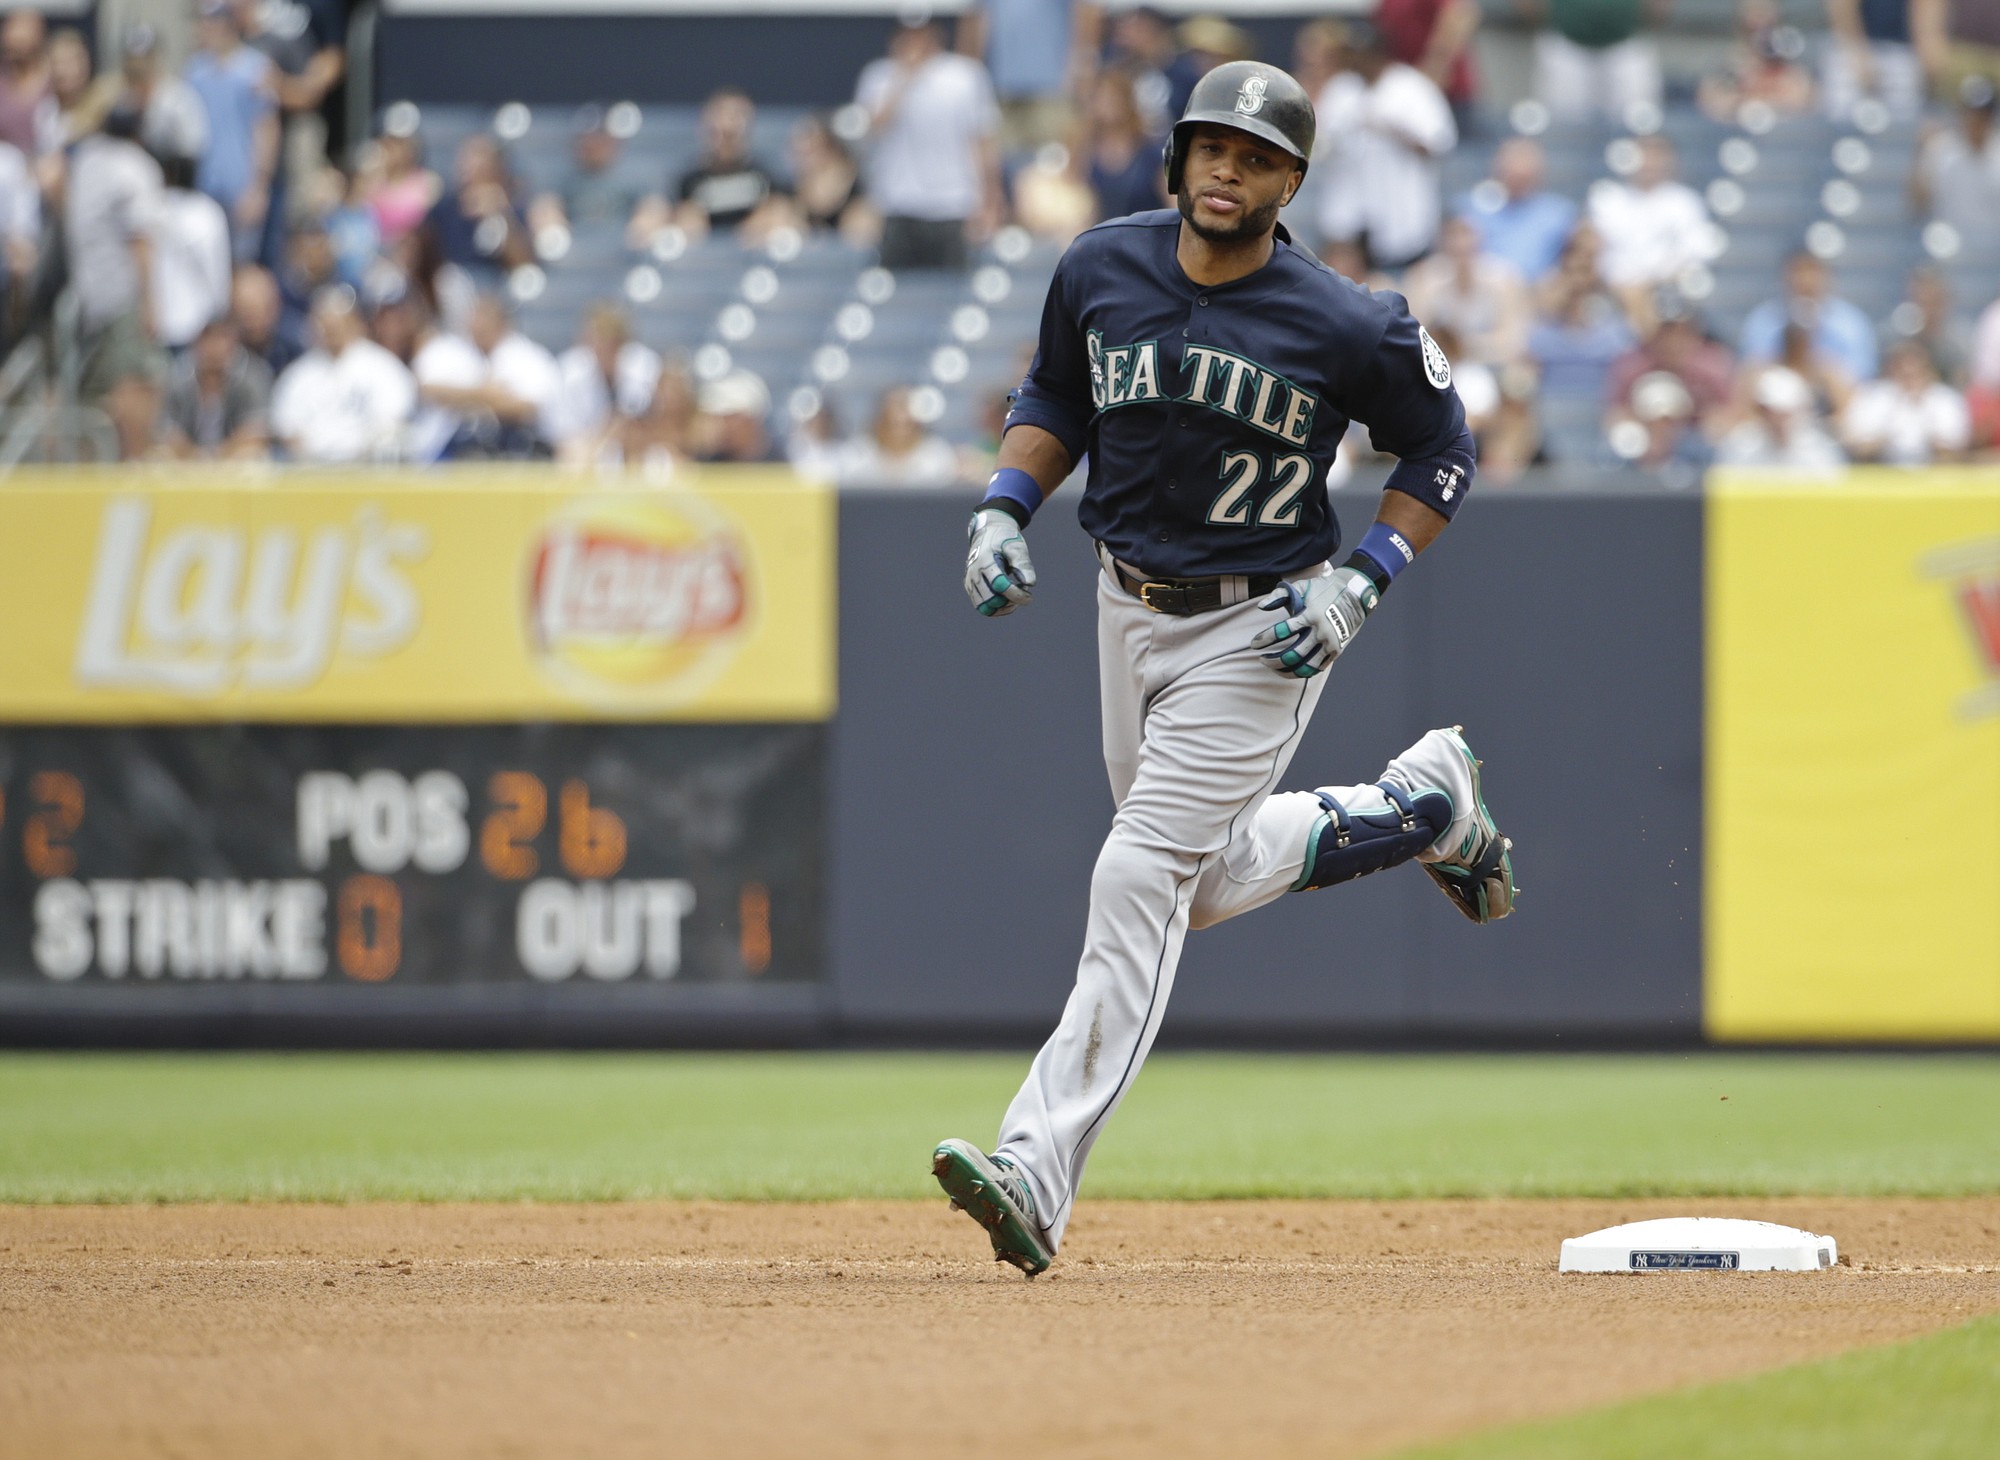 Seattle Mariners' Robinson Cano (22) runs the bases after hitting a two run home run during the first inning against the New York Yankees on Saturday, July 18, 2015, in New York.